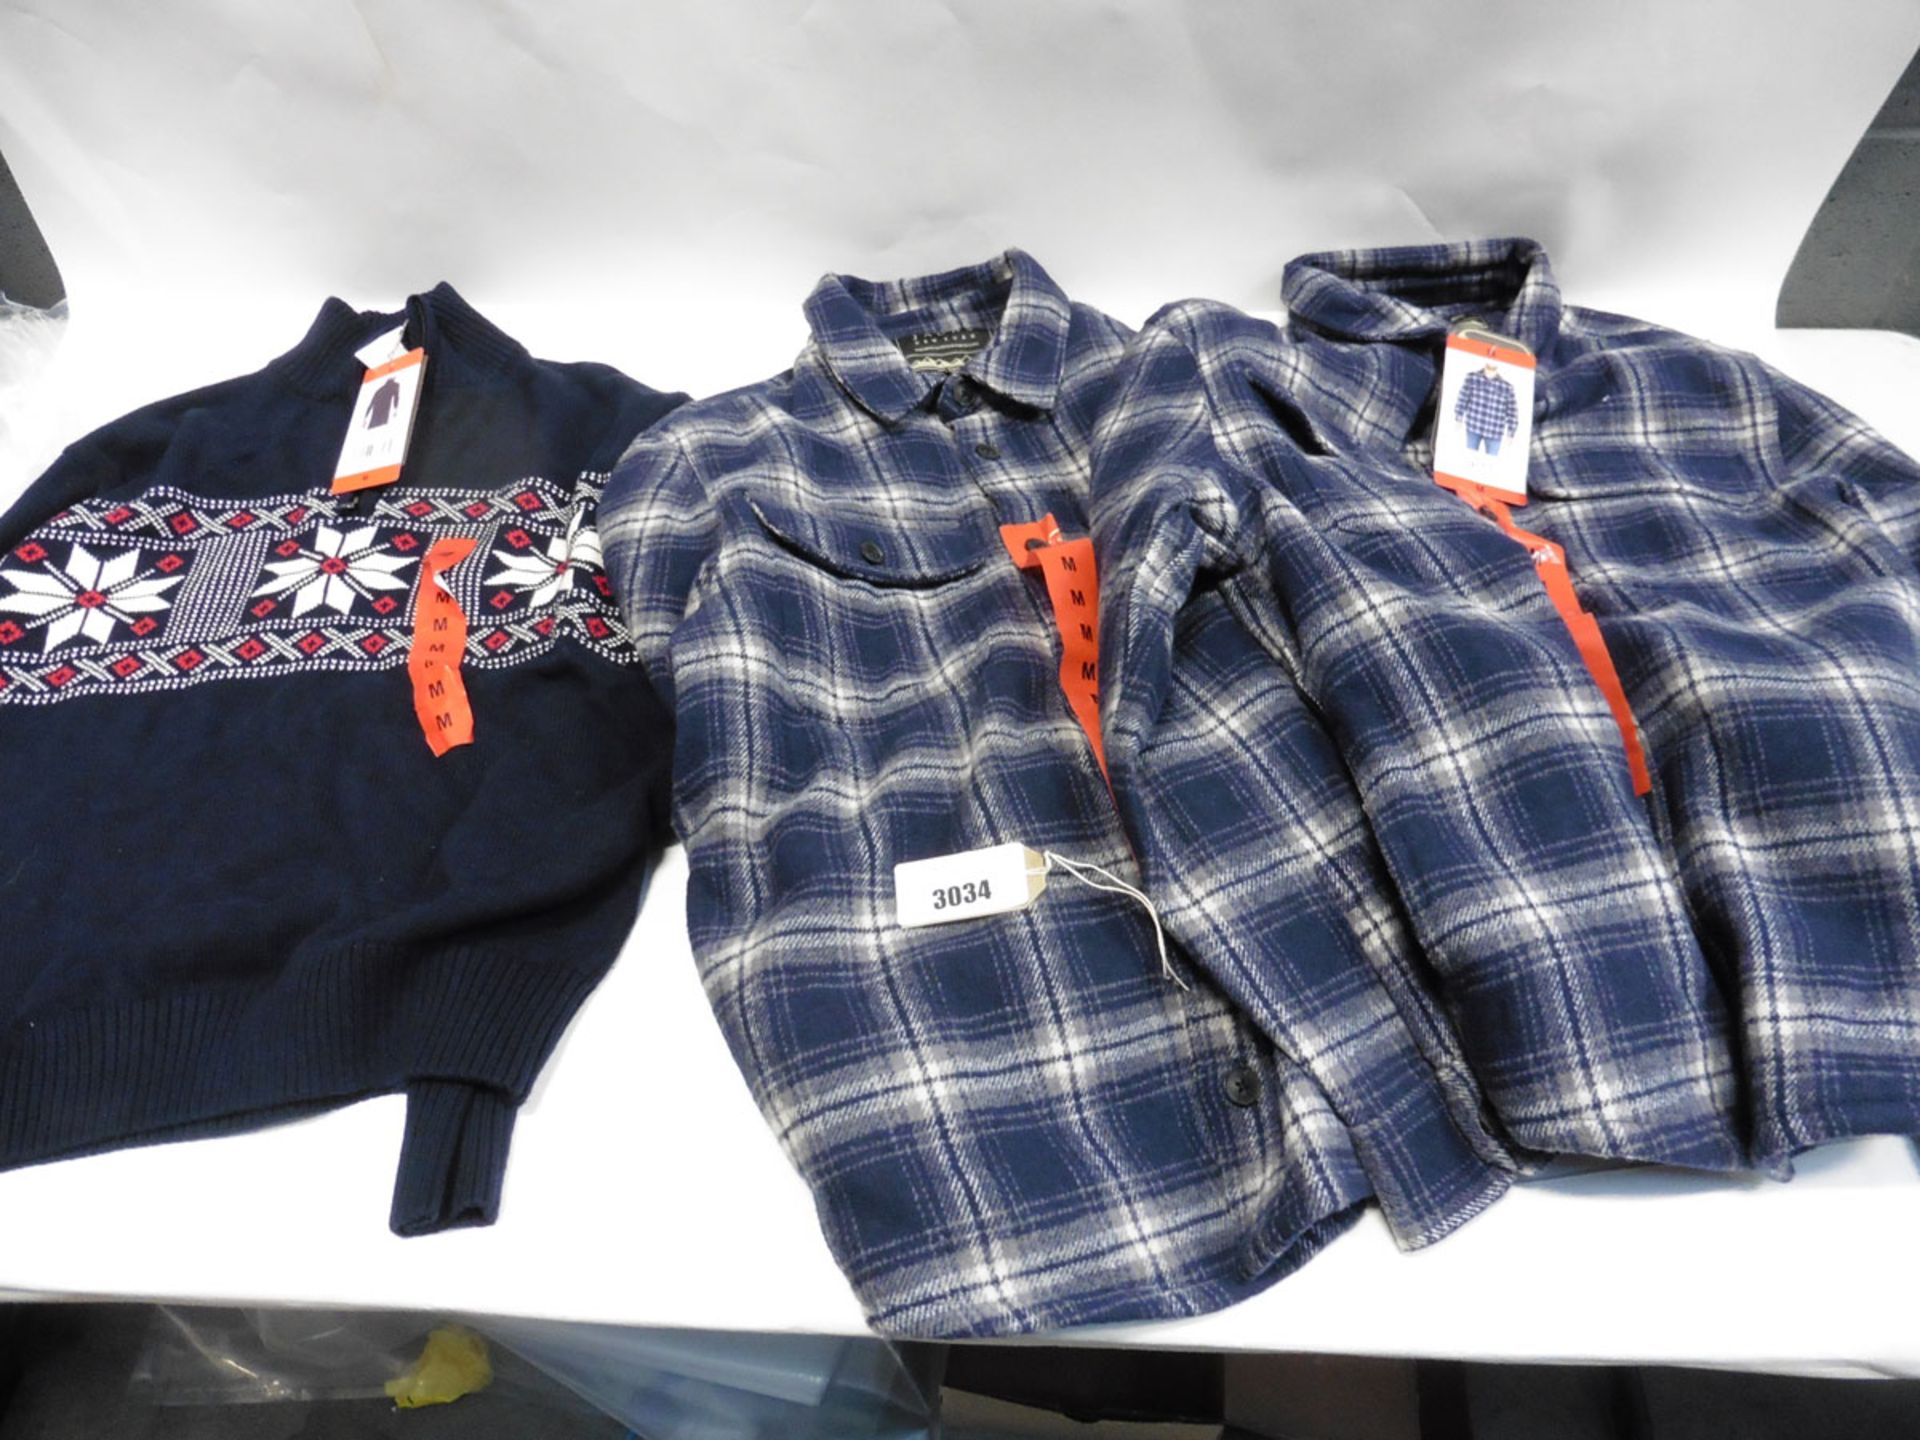 Mens Weatherproof jumper in navy size M, plus 2 mens Jack New York chequered button fleeces in